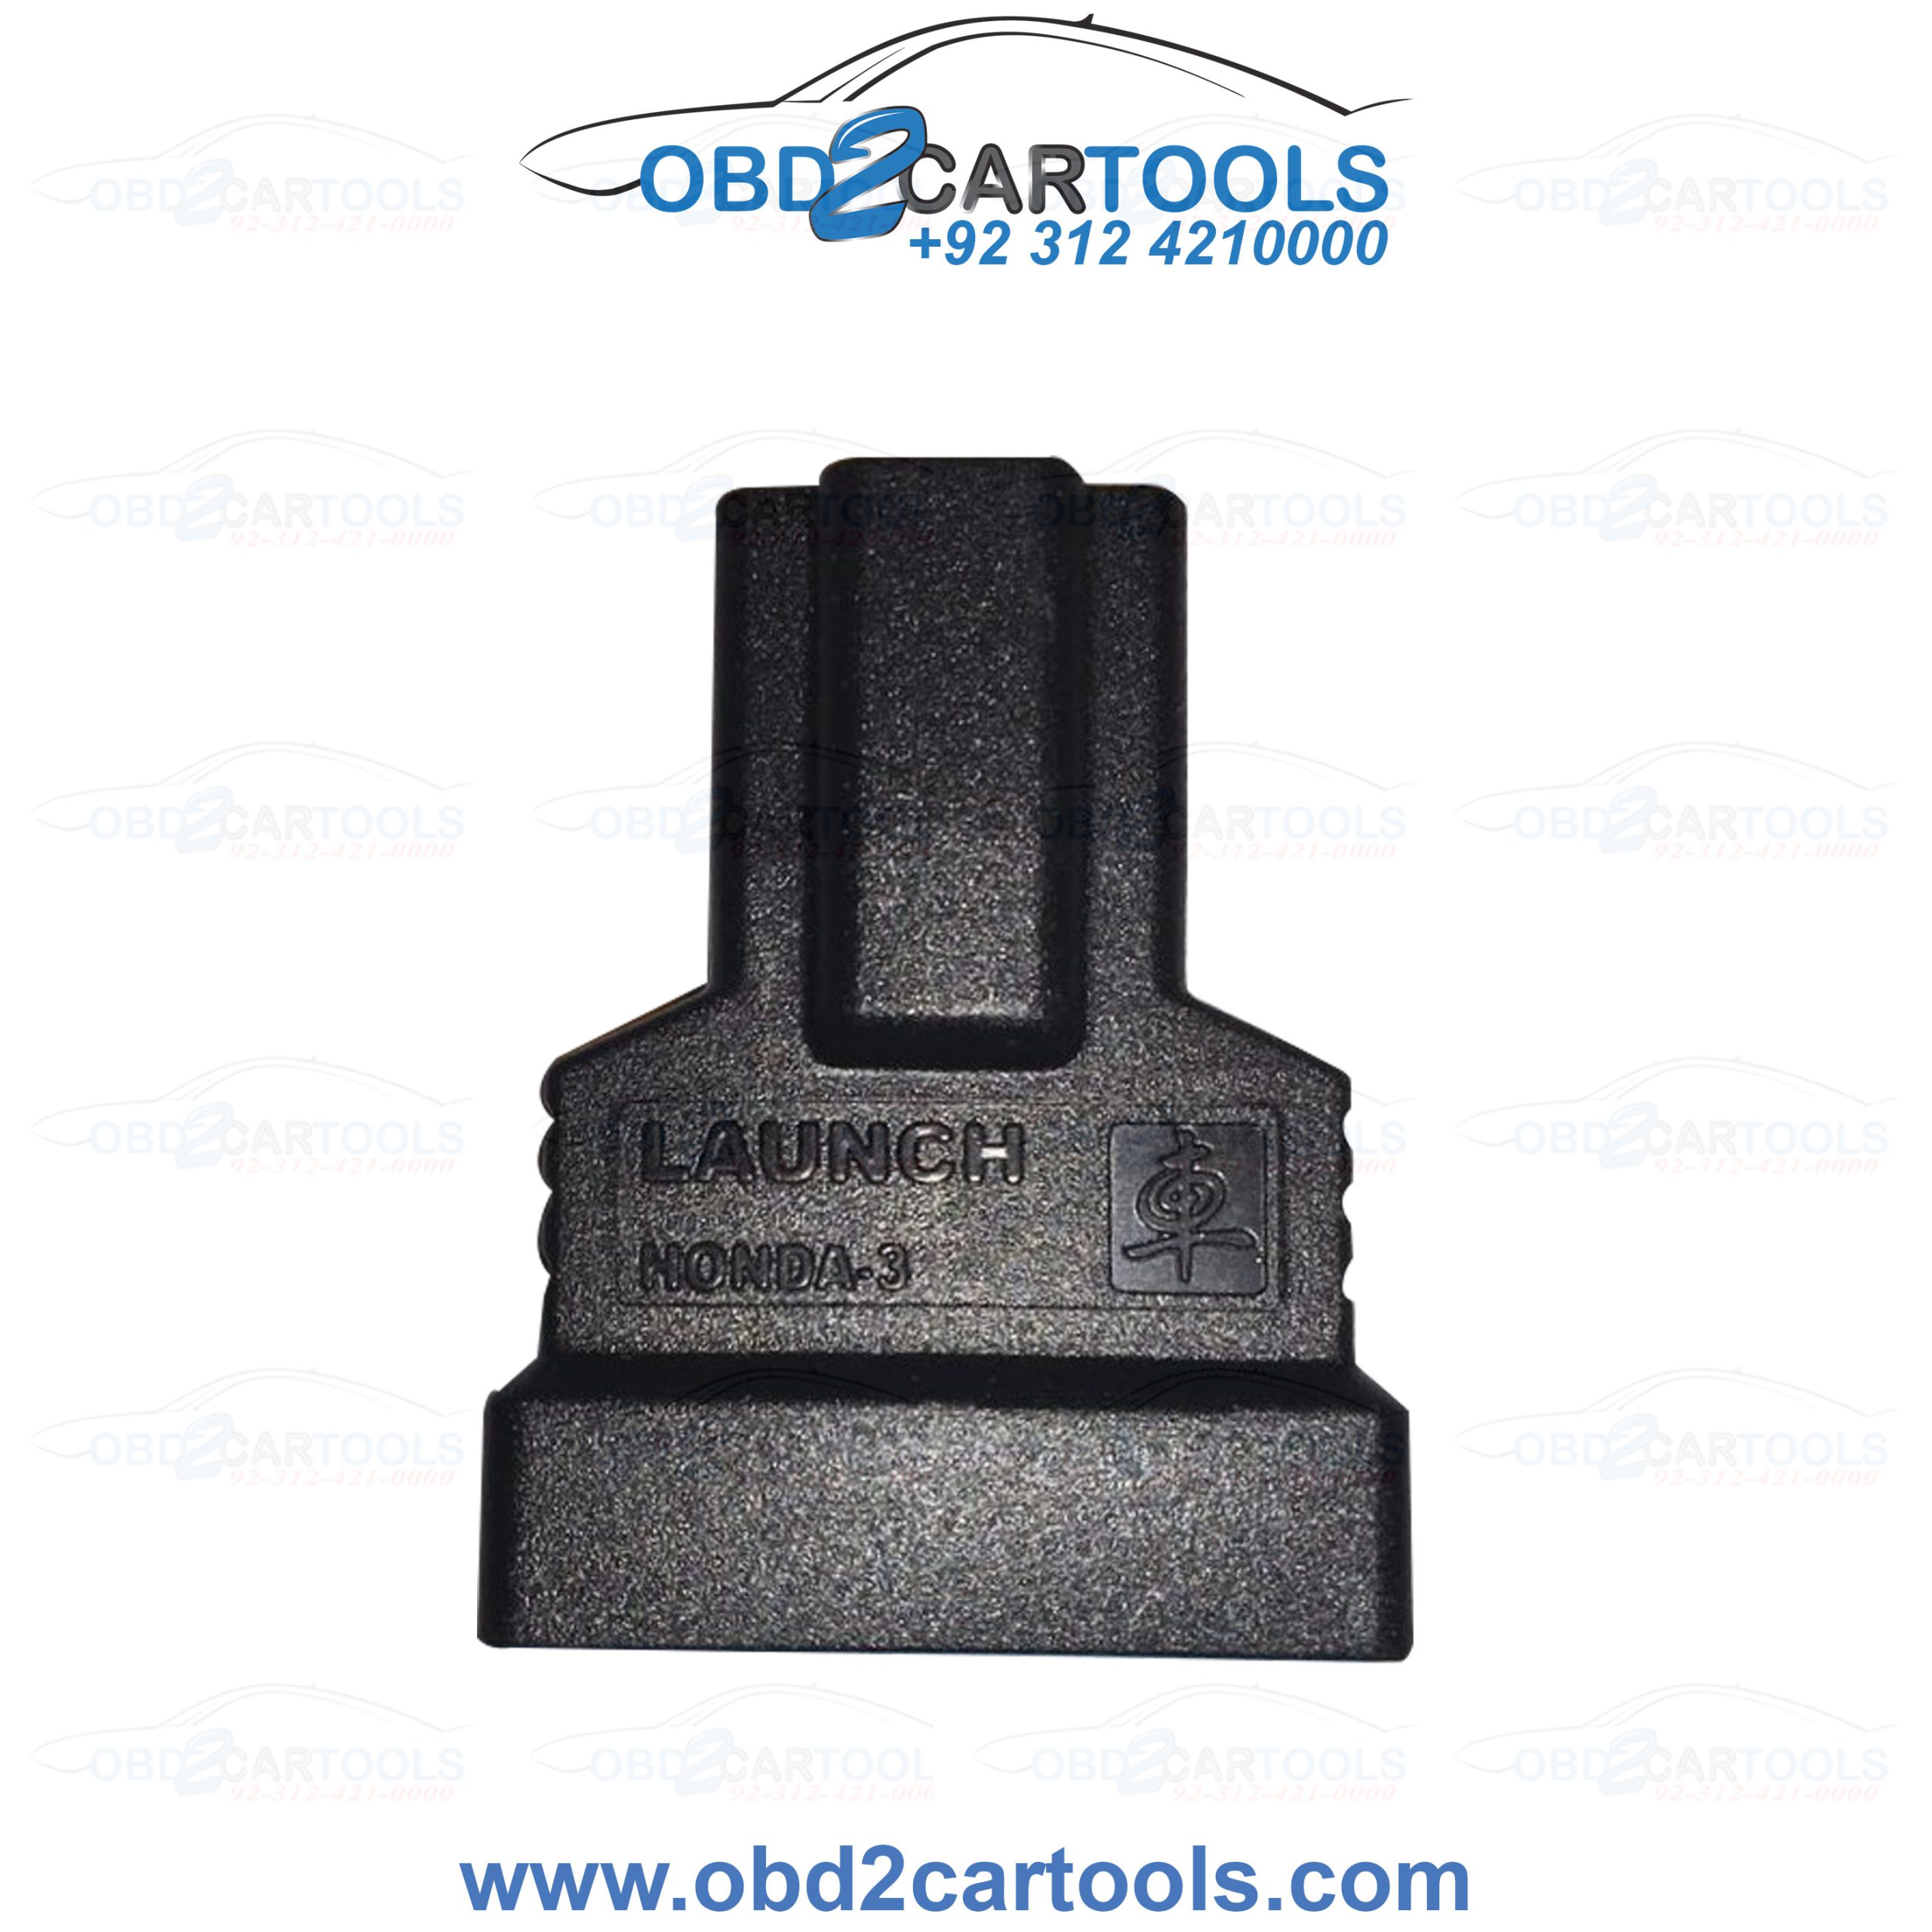 Product image for Launch Honda 3 pin adapter for Launch Scanner